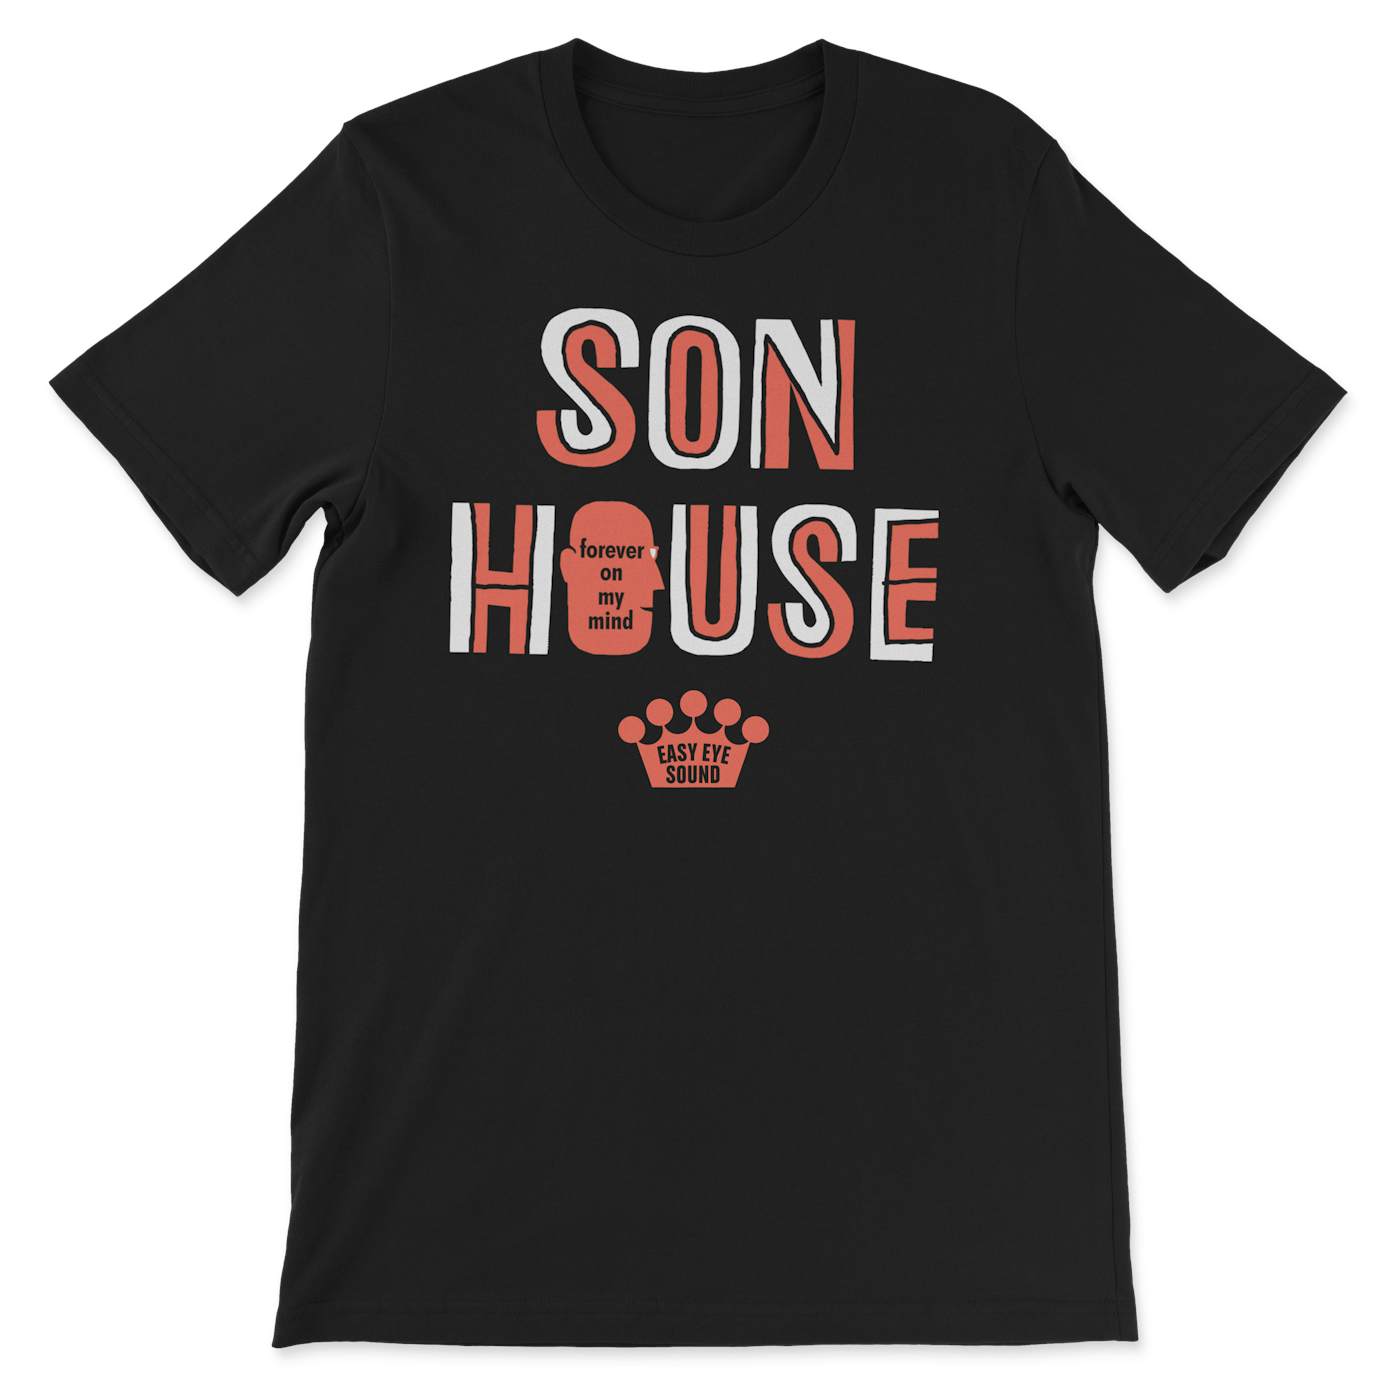 Son House Forever On My Mind [Logo T-Shirt]